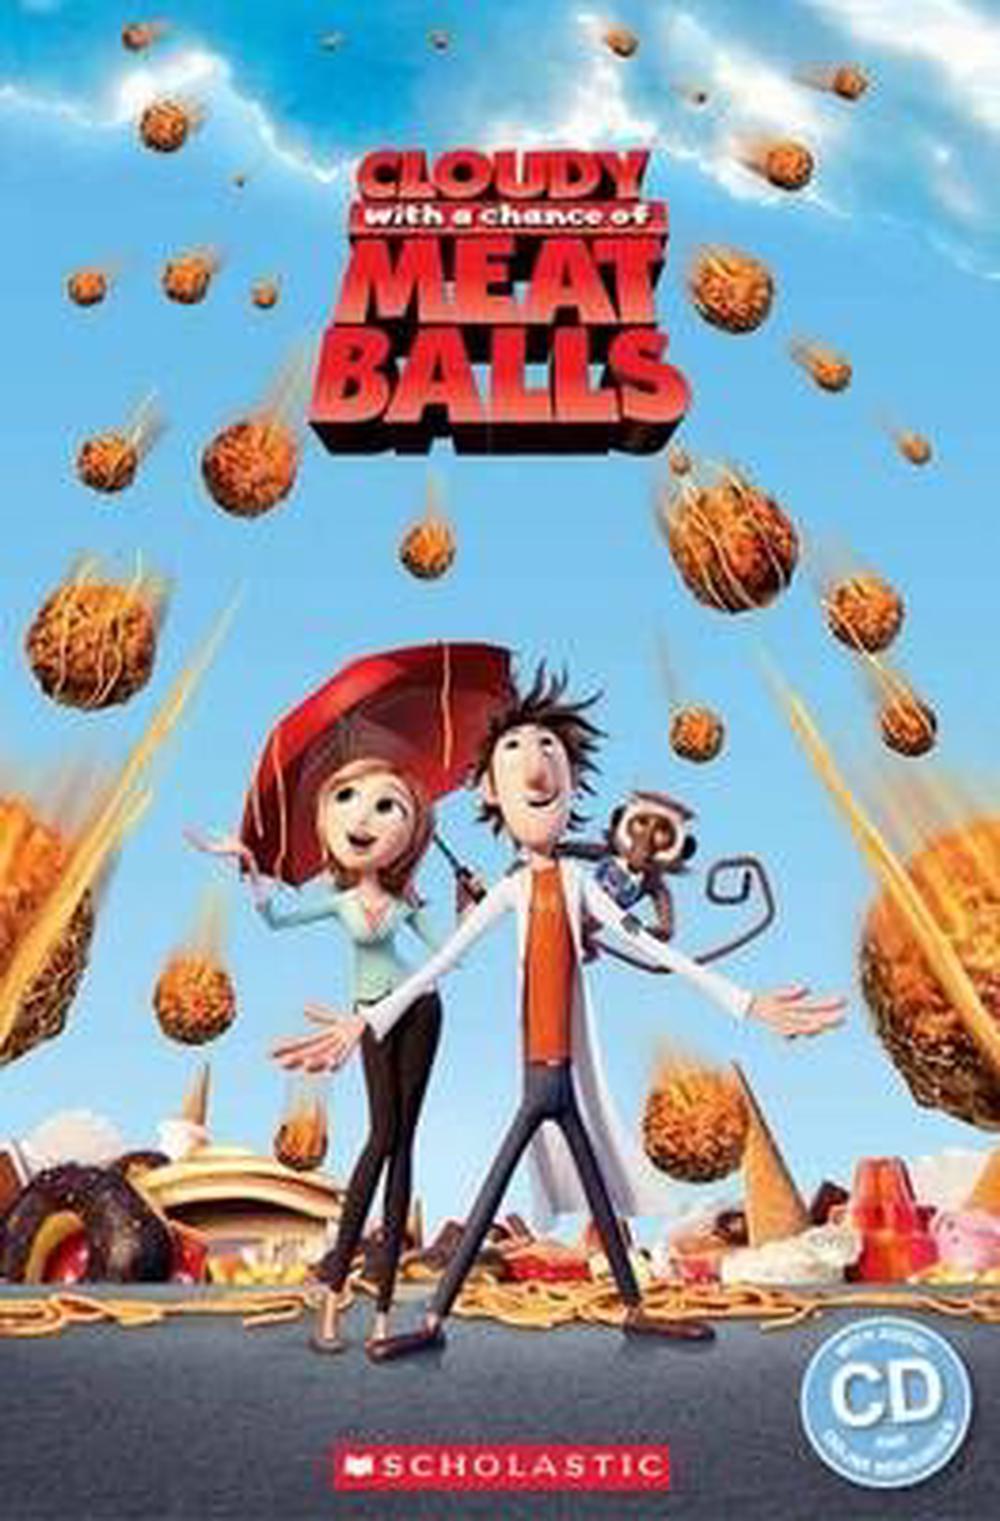 a cloudy chance of meatballs book